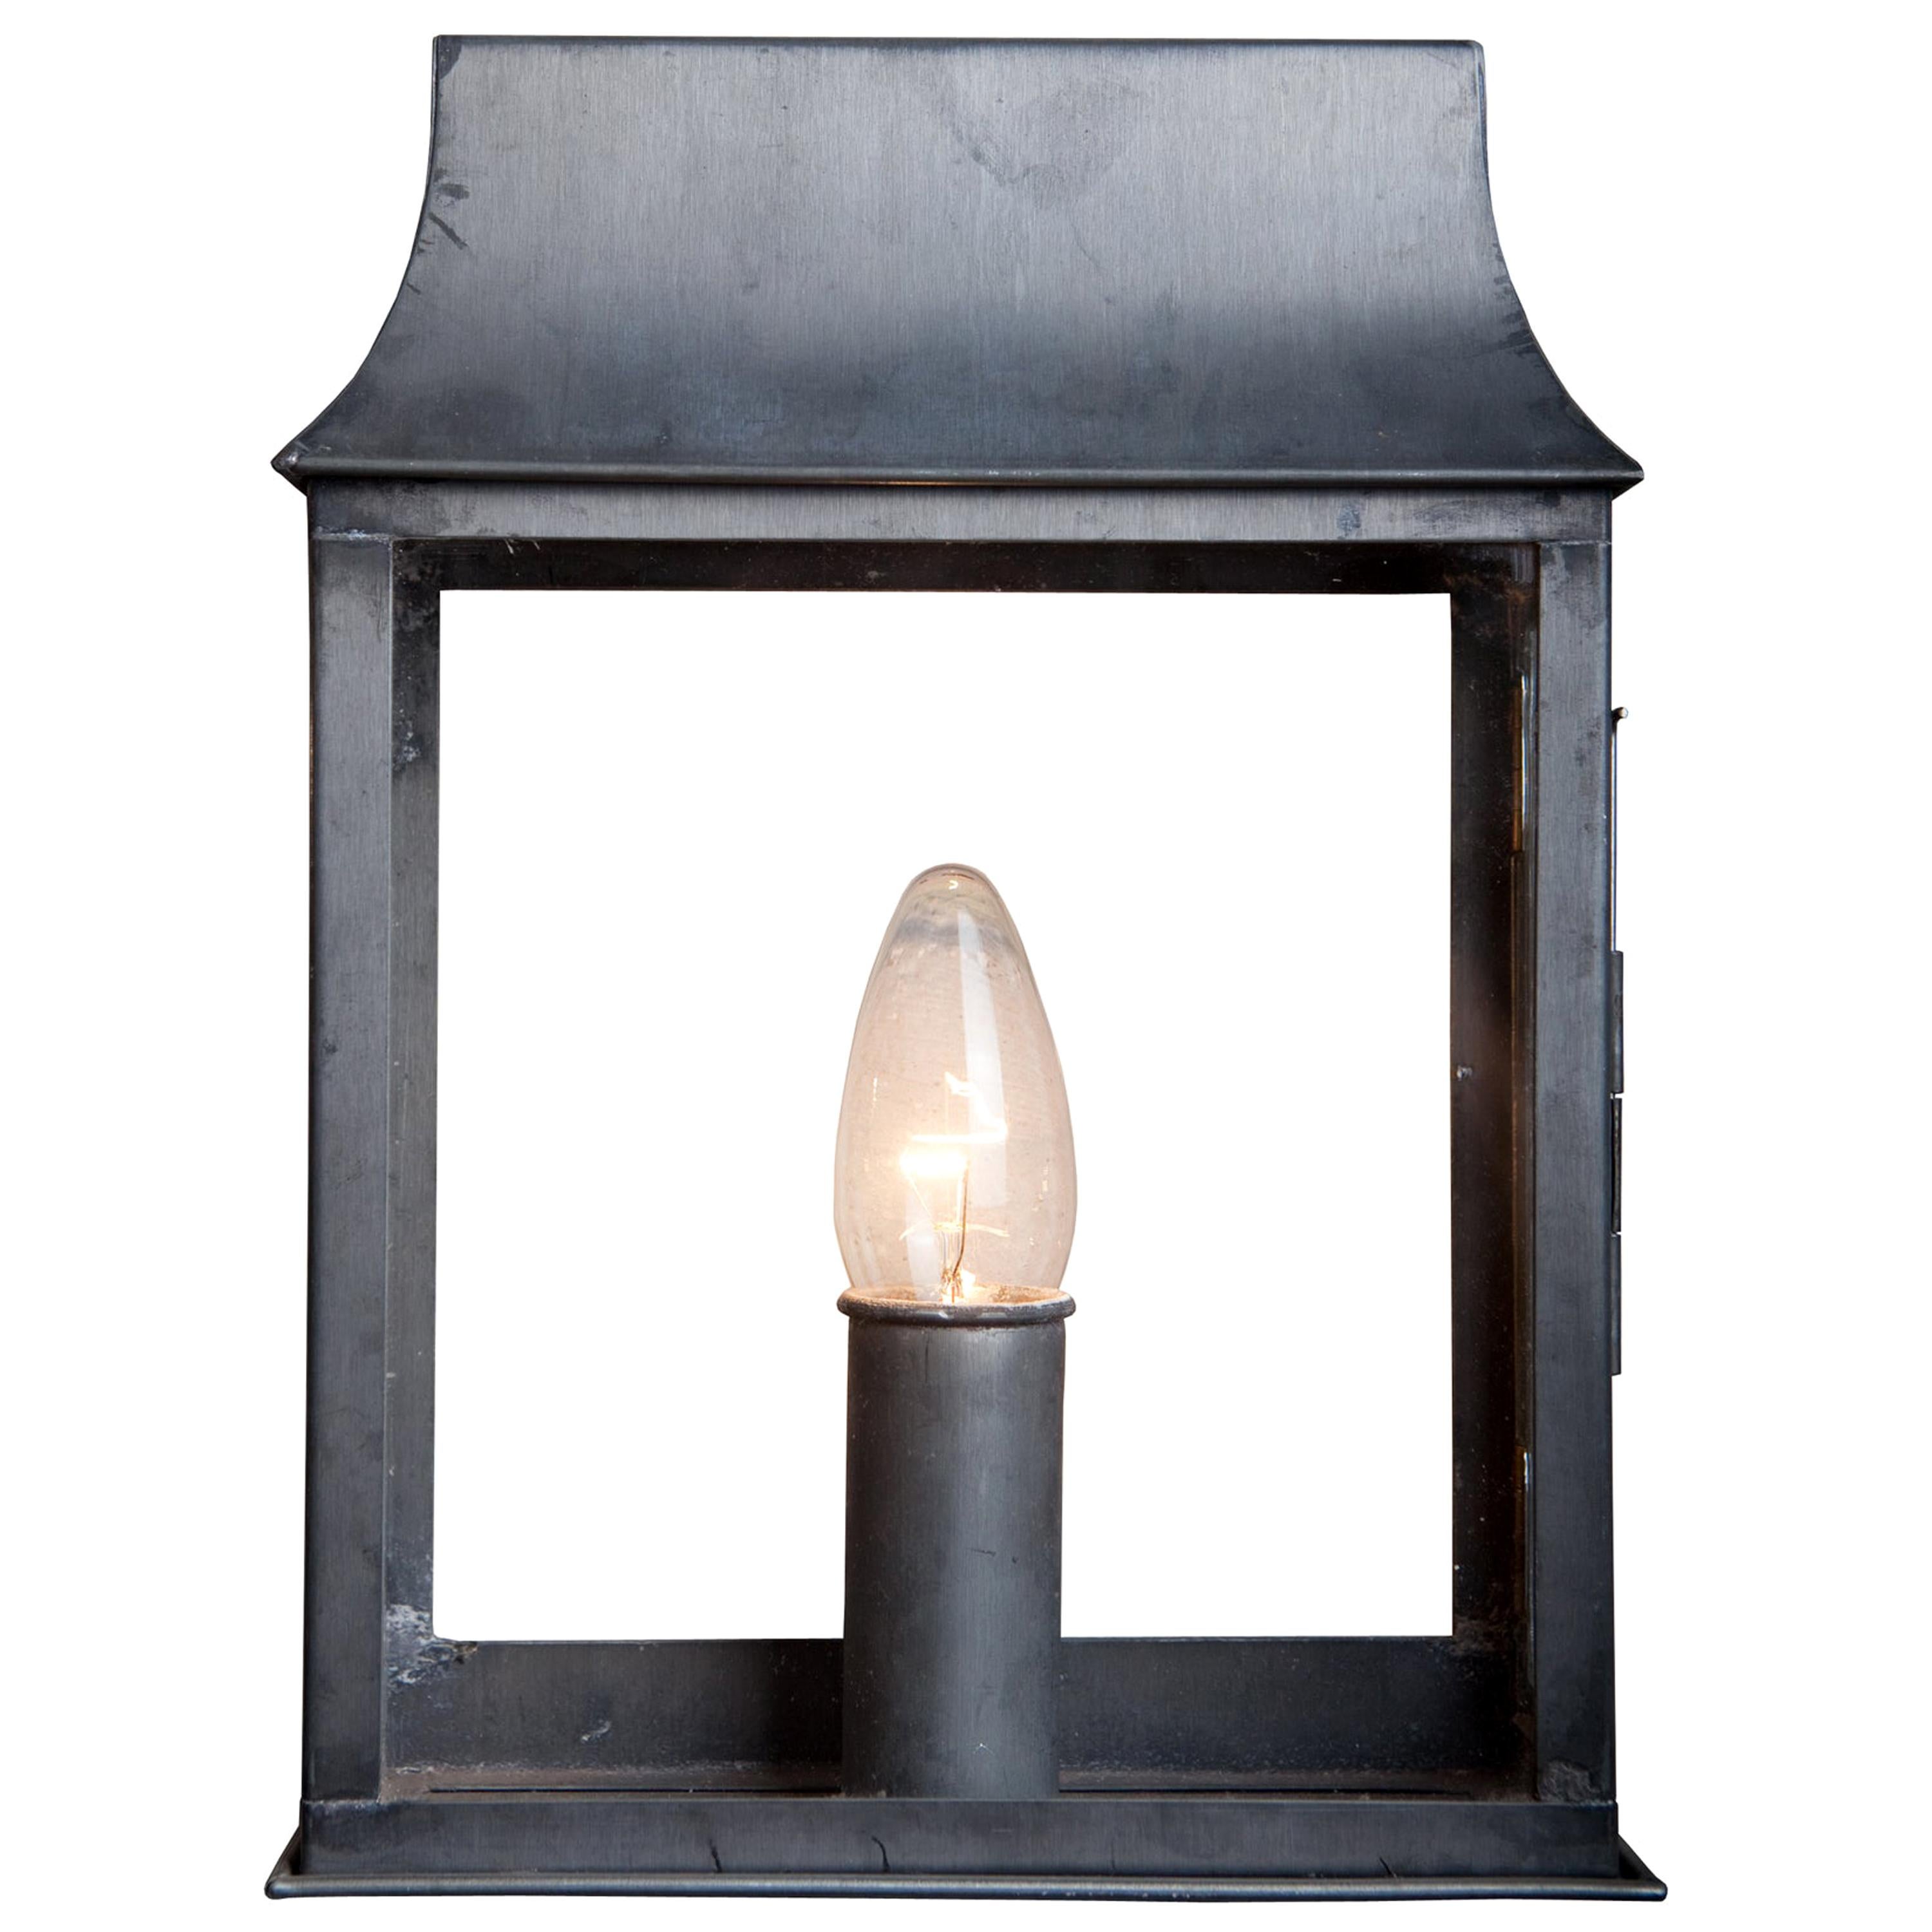 Candle House, Wall Luminaire in Zinc, for Outside or Inside For Sale